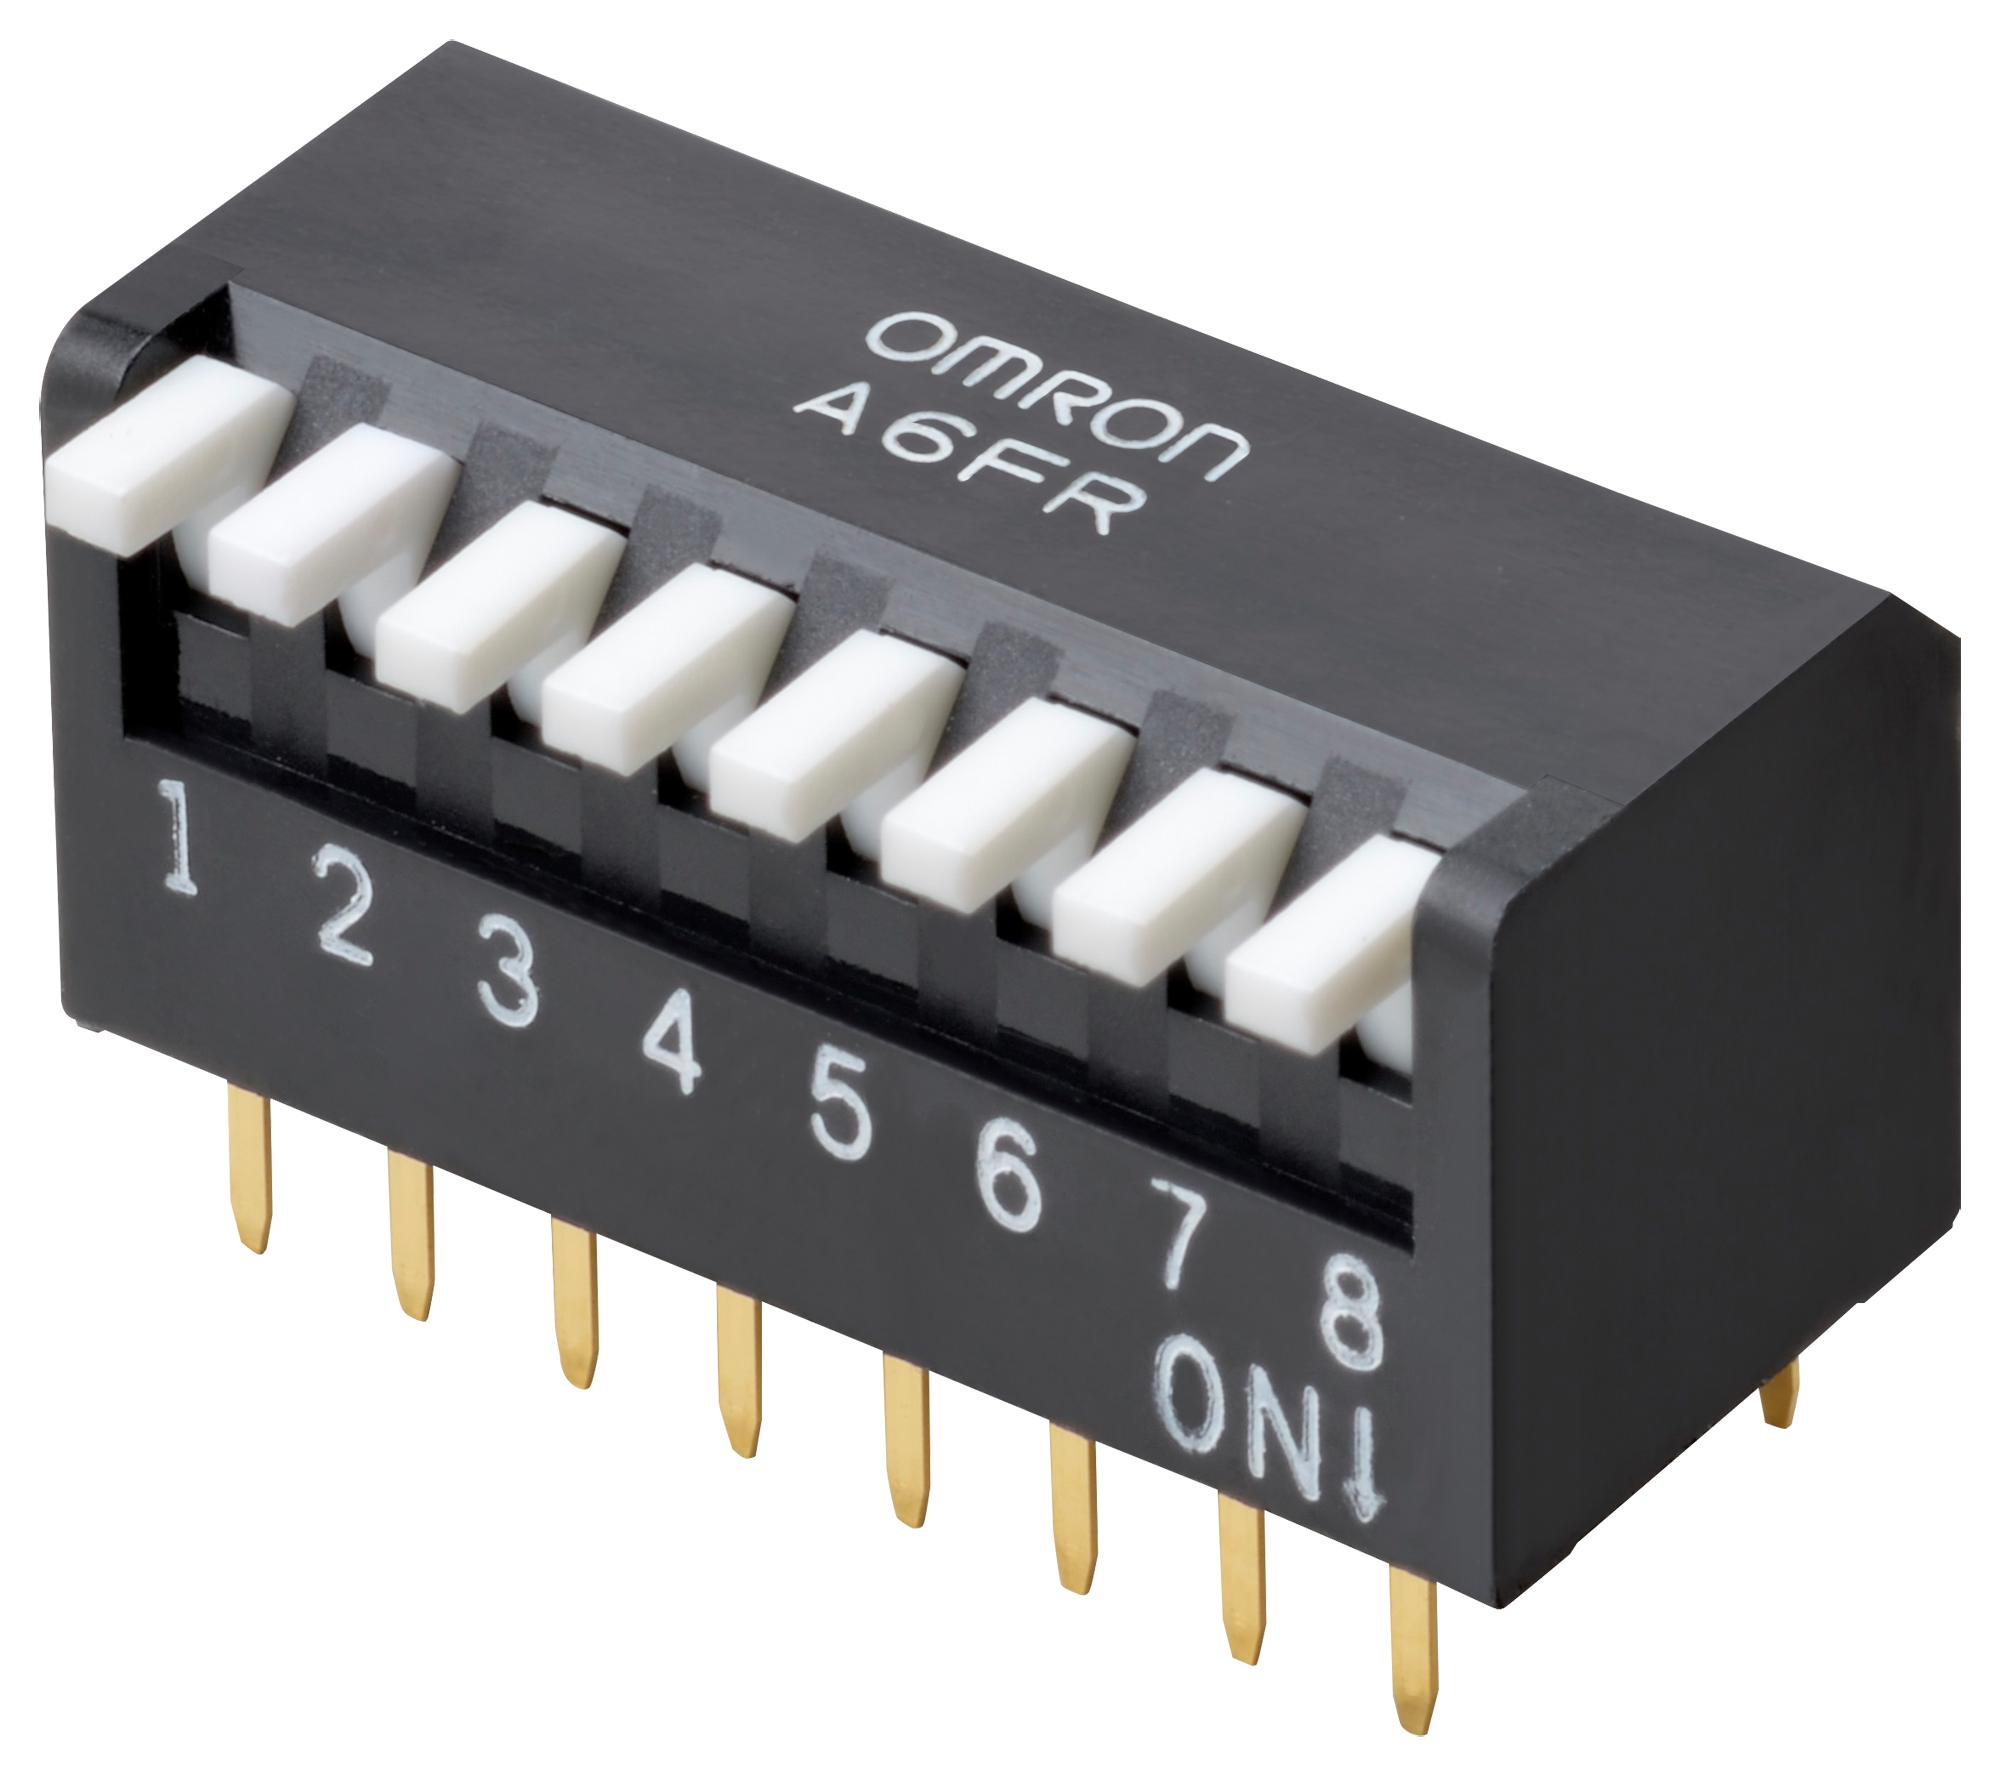 A6FR-8104 DIP SWITCH, 8POS, SPST, PIANO KEY, TH OMRON